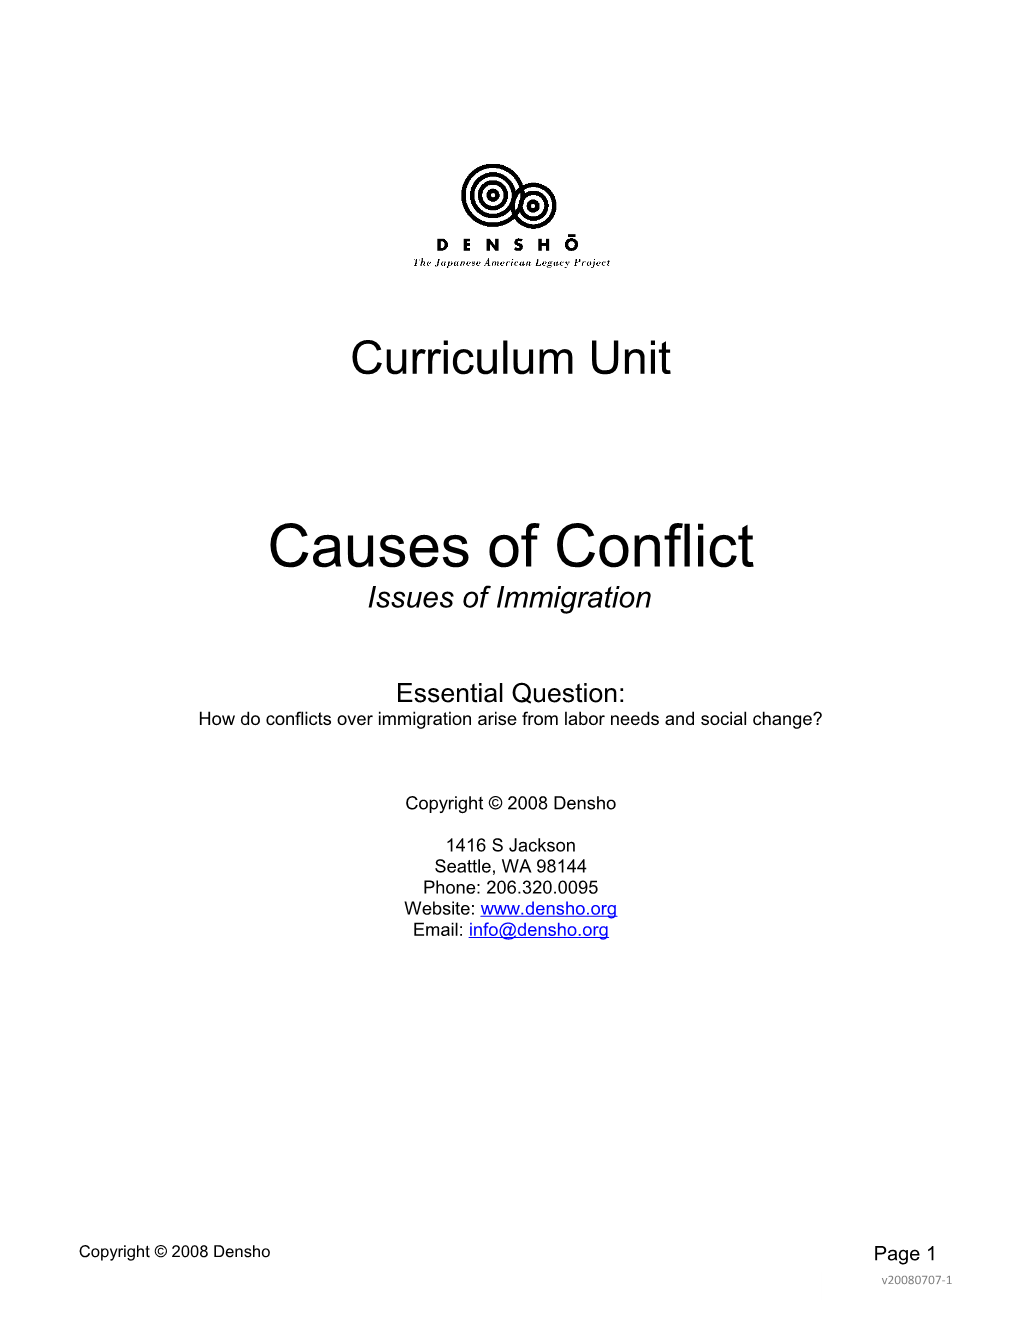 Causes of Conflict: Issues of Immigration Curriculum